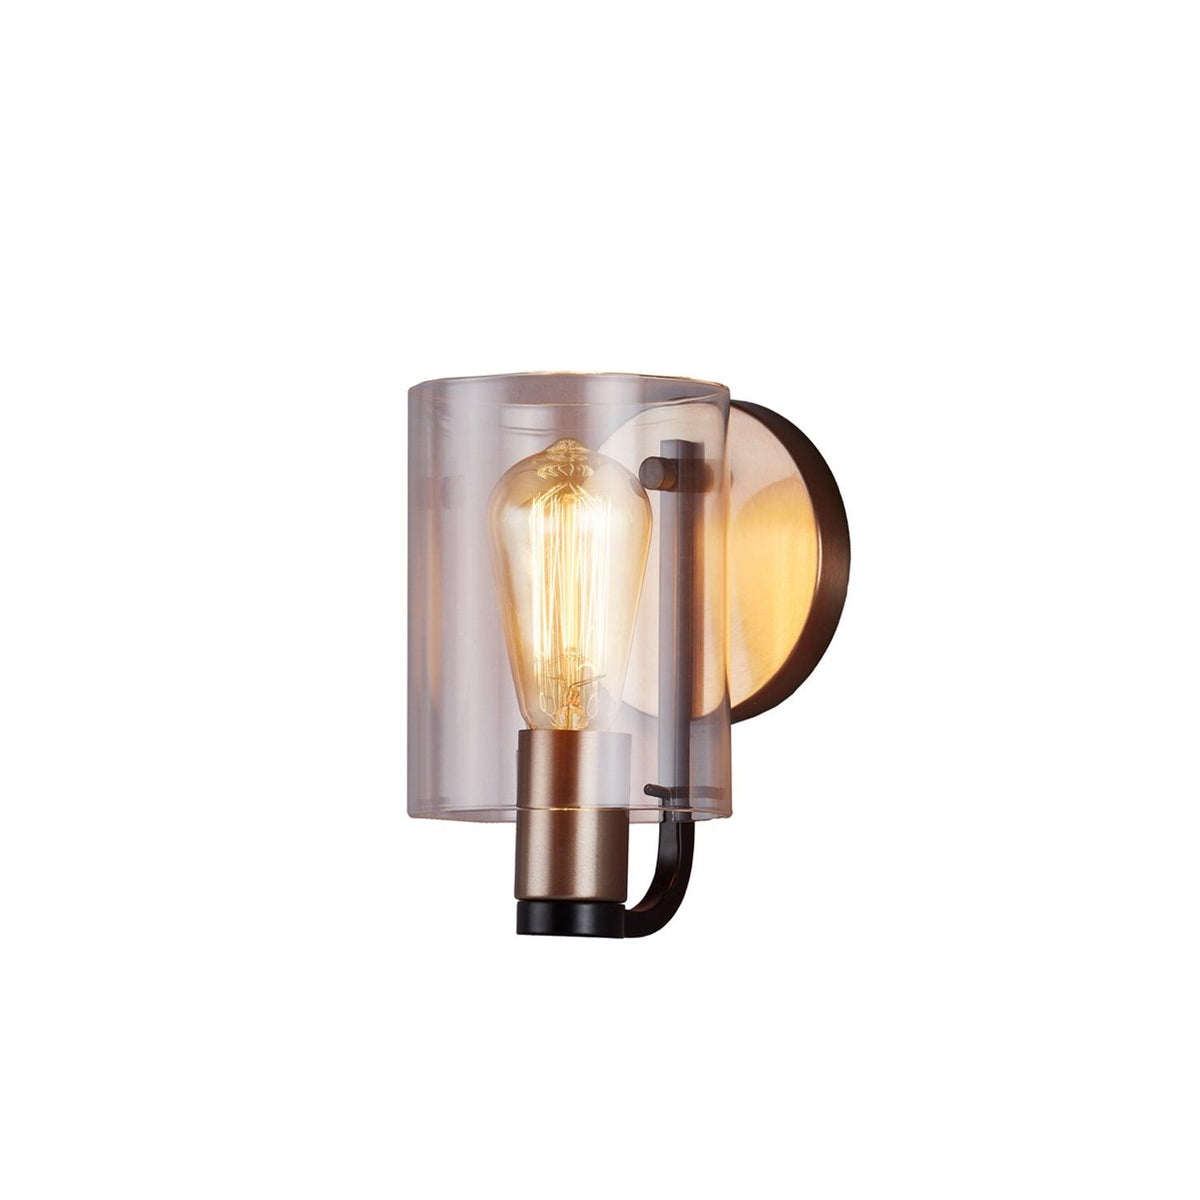 Justice Designs - Poise Wall Sconce - FSN-8081-CLER-MBBR | Montreal Lighting & Hardware